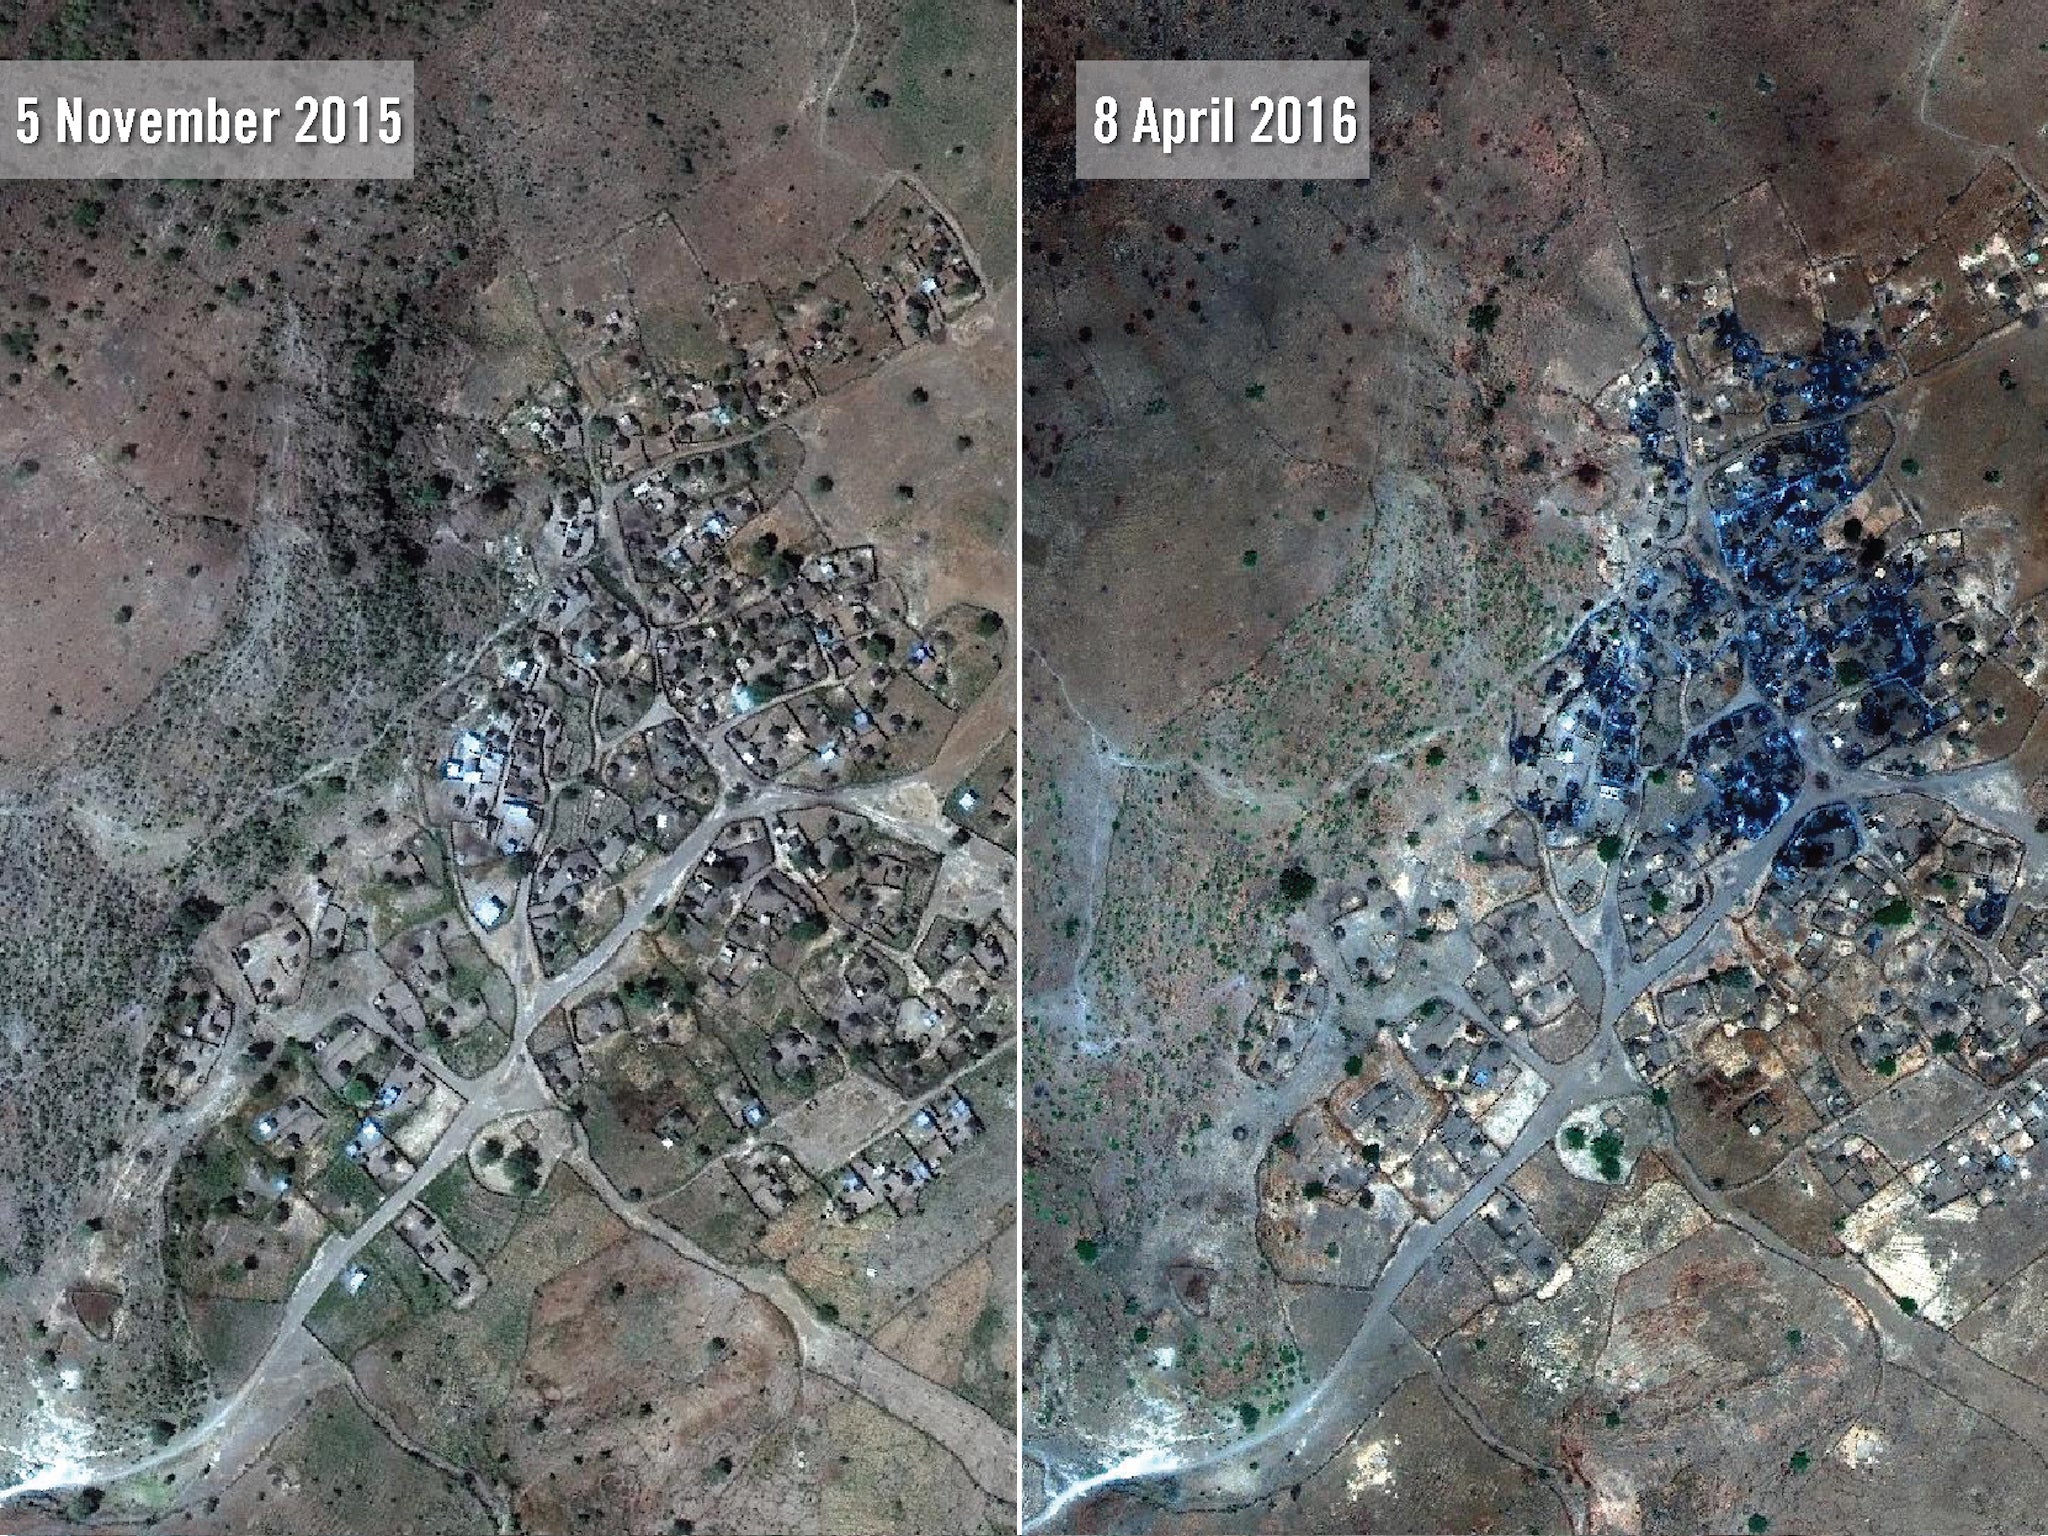 Satellite imagery from November 2015 (L) and 8 April 2016 shows the destruction of the western part of Nuoguey village (top of image), while the eastern half remains relatively intact